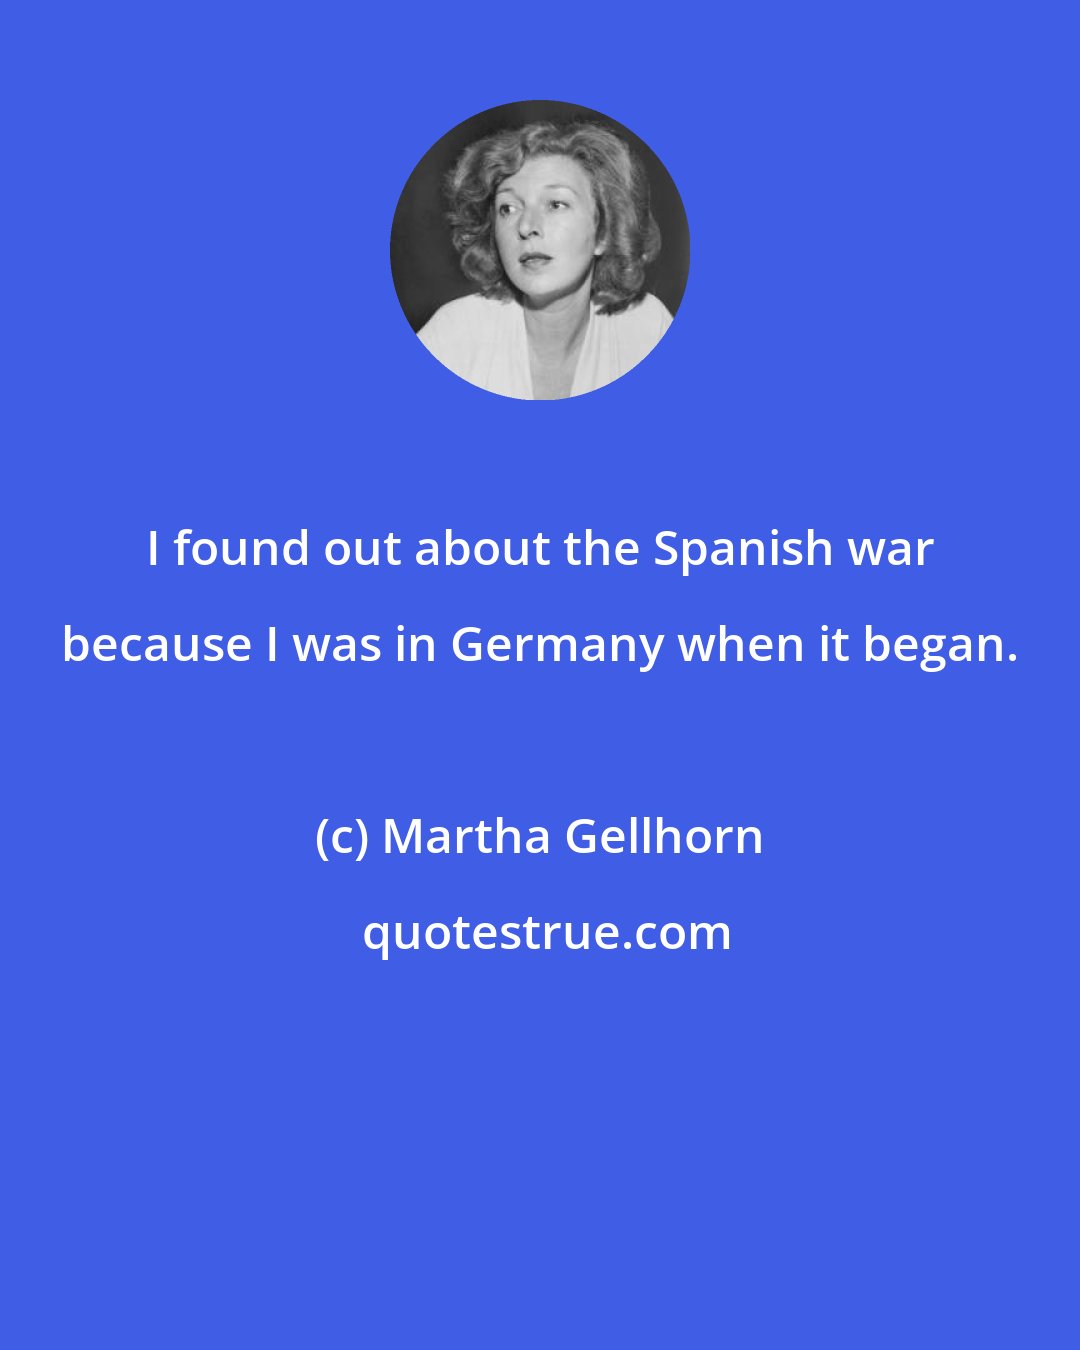 Martha Gellhorn: I found out about the Spanish war because I was in Germany when it began.